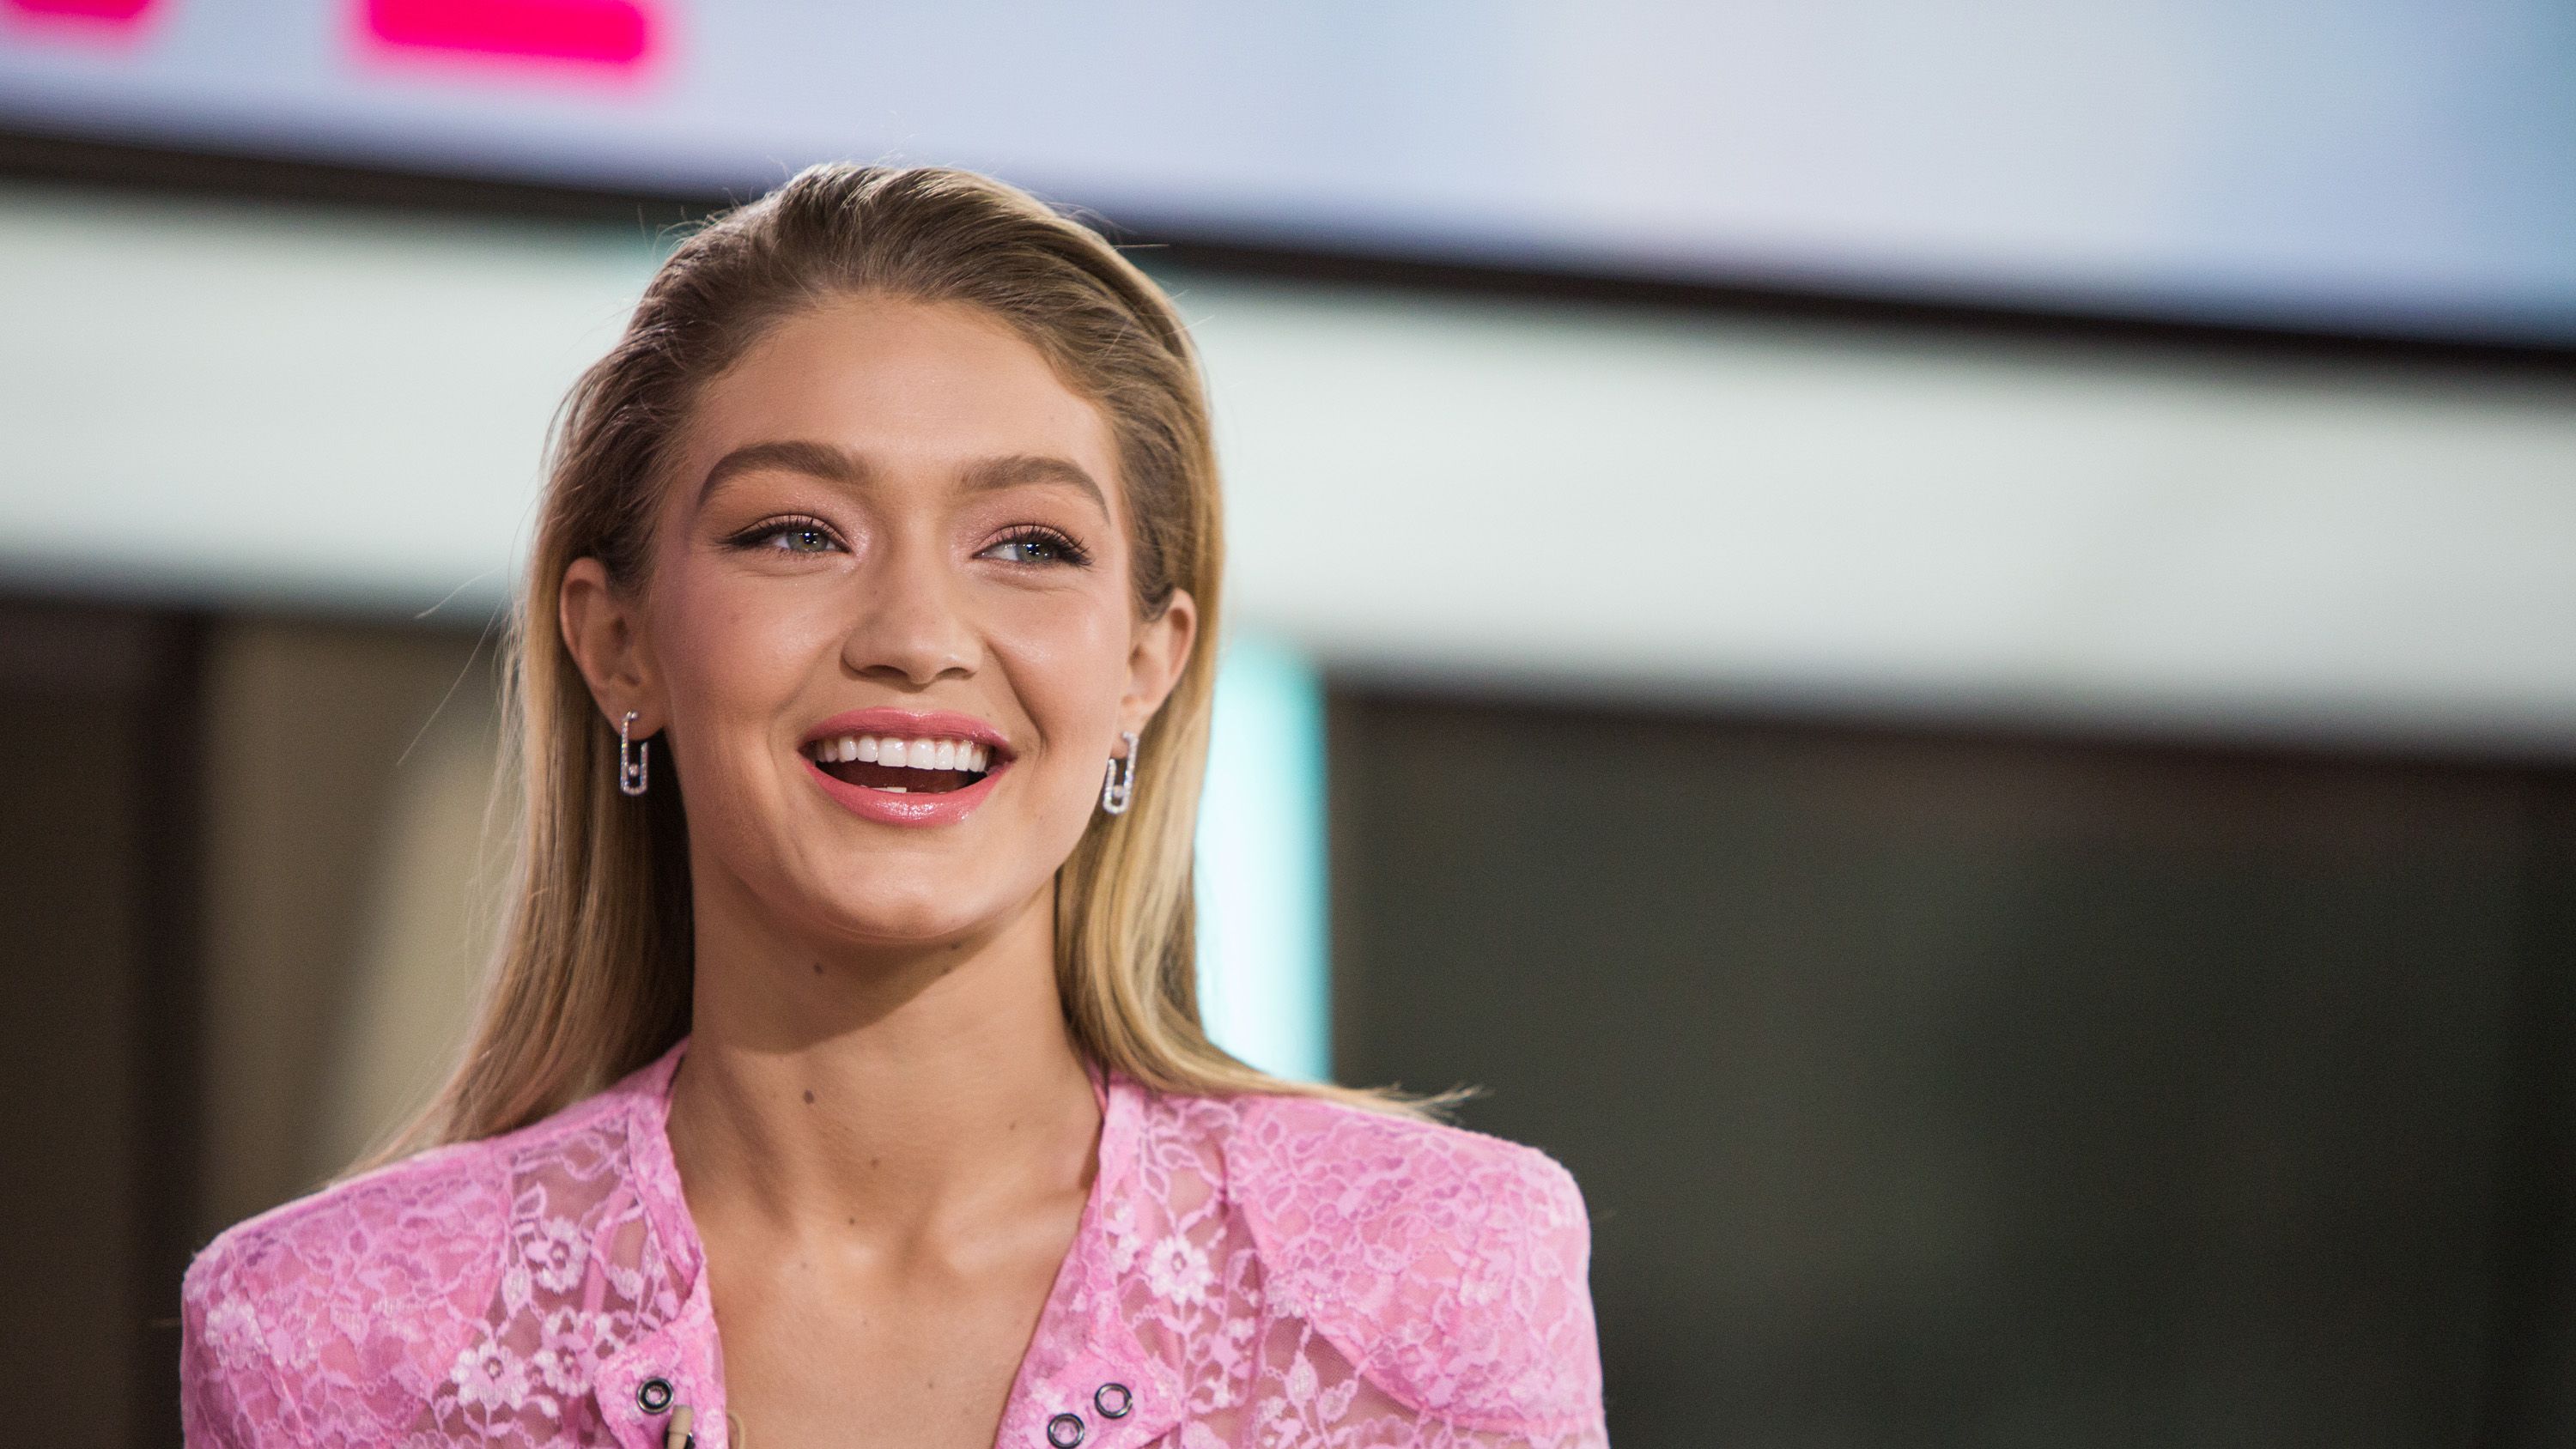 Gigi Hadid Shares New Photos of Baby Khai to Mark First Mother's Day